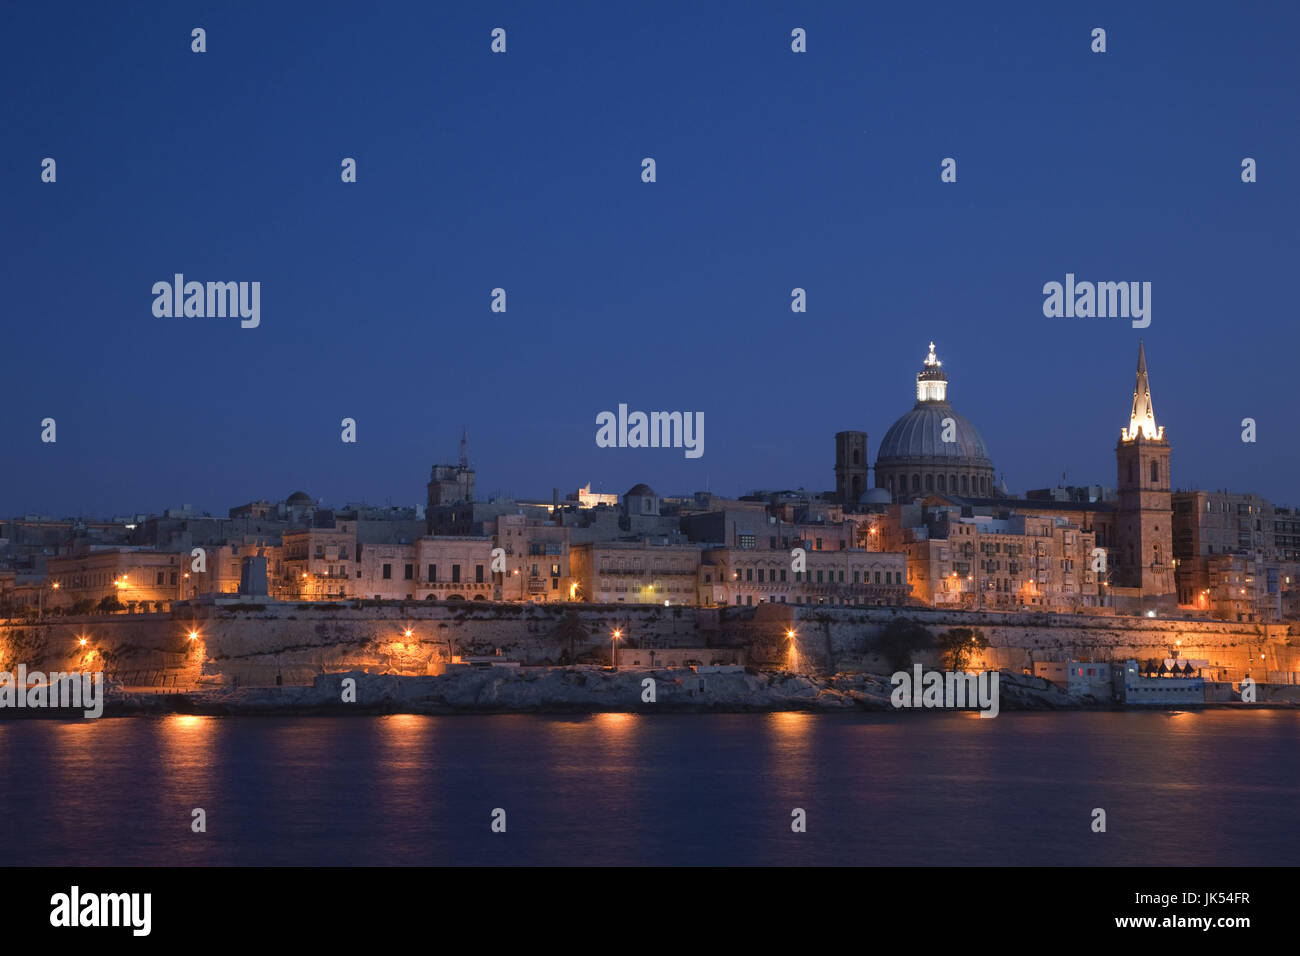 Malta, Valletta, skyline with St. Paul's Anglican Cathedral and Carmelite Church from Sliema, dusk Stock Photo